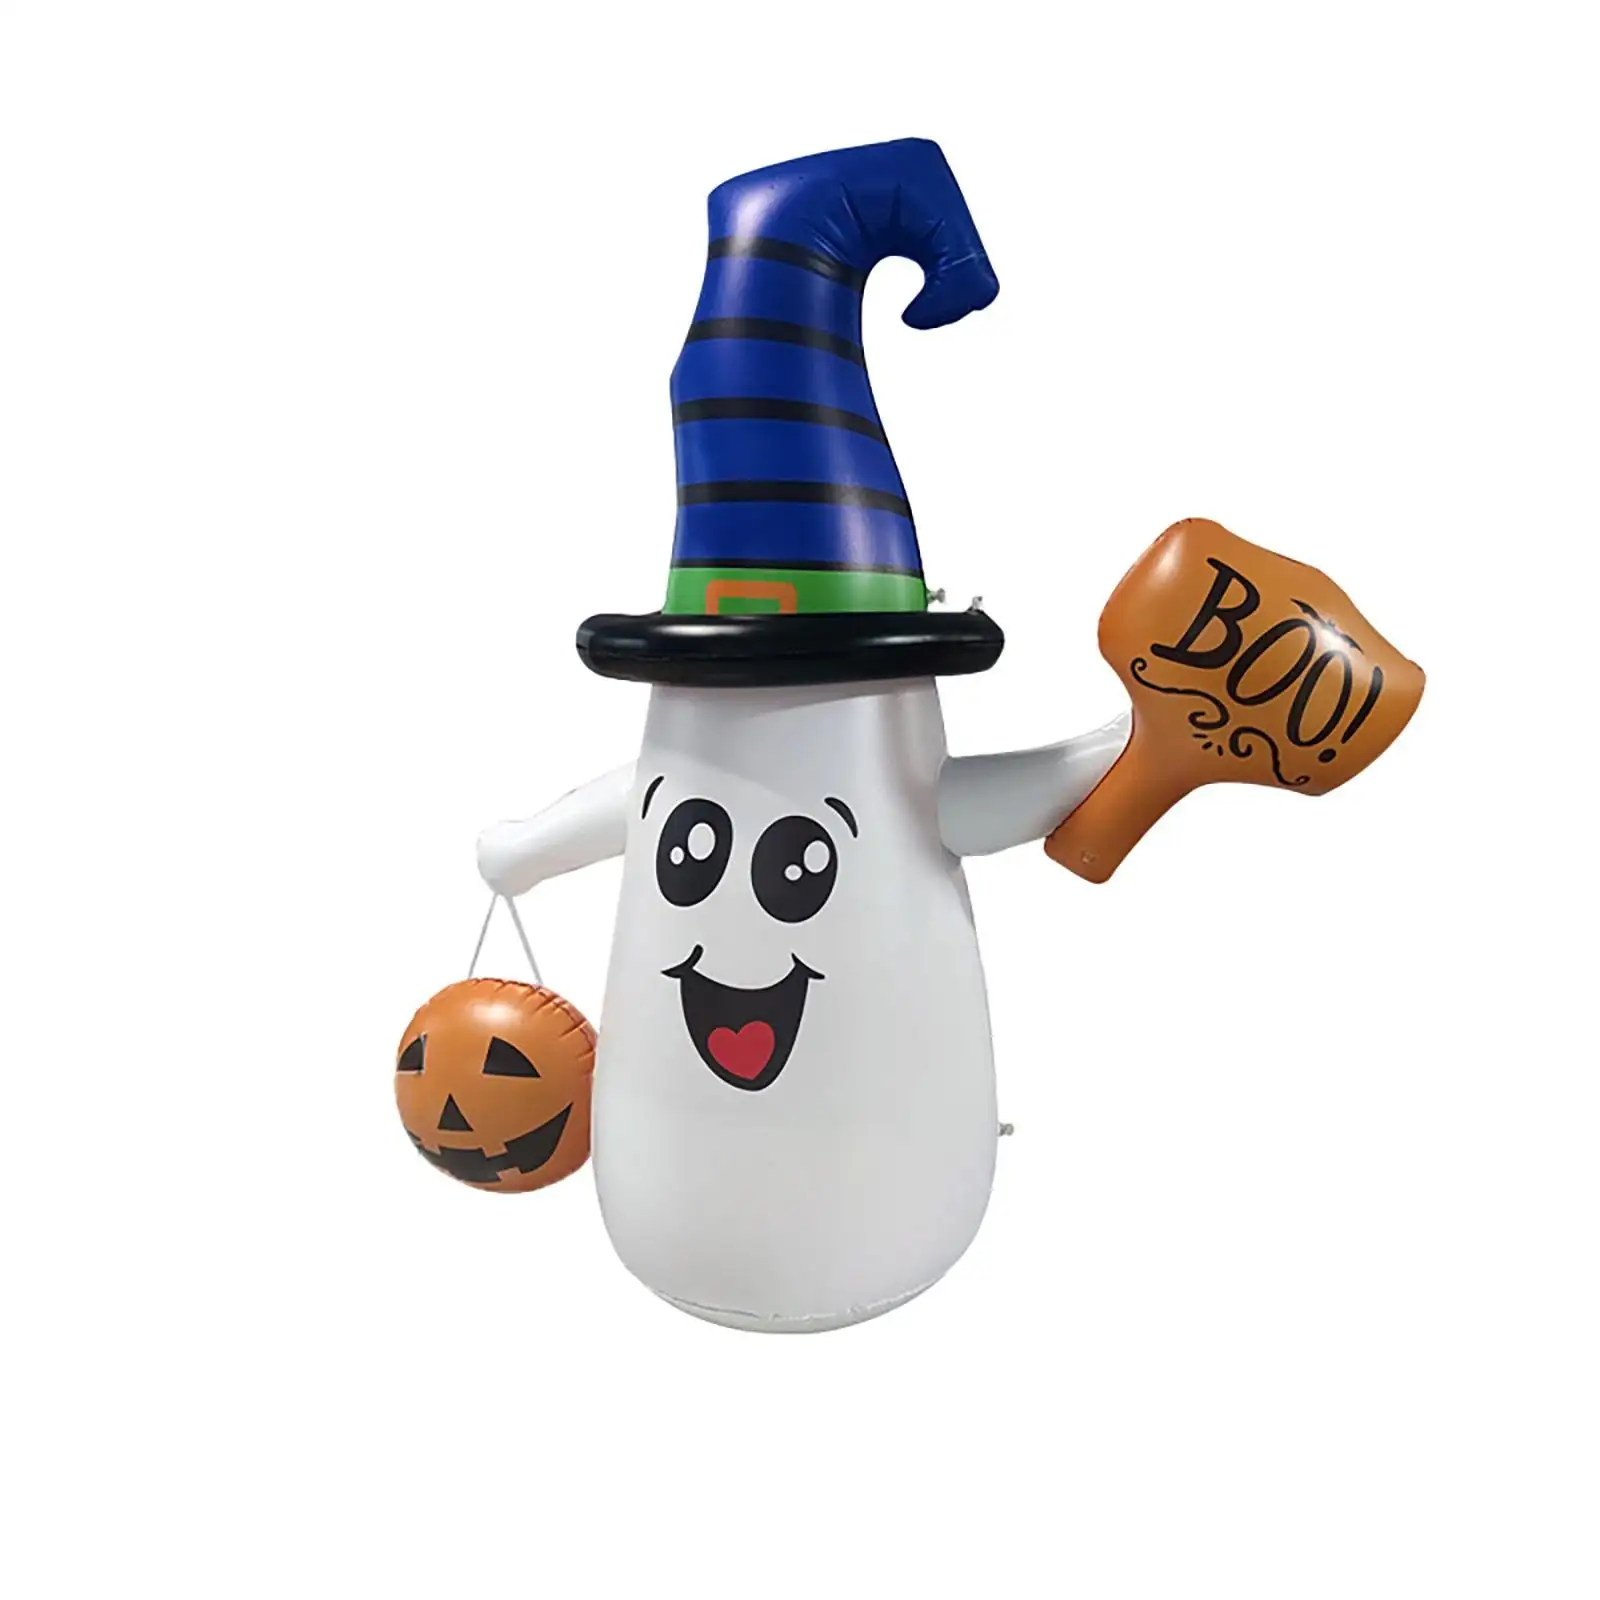 2022 Wonderful Novelty Halloween Decorations Indoor And Outdoor party Use Inflatable Snowman Tumbler